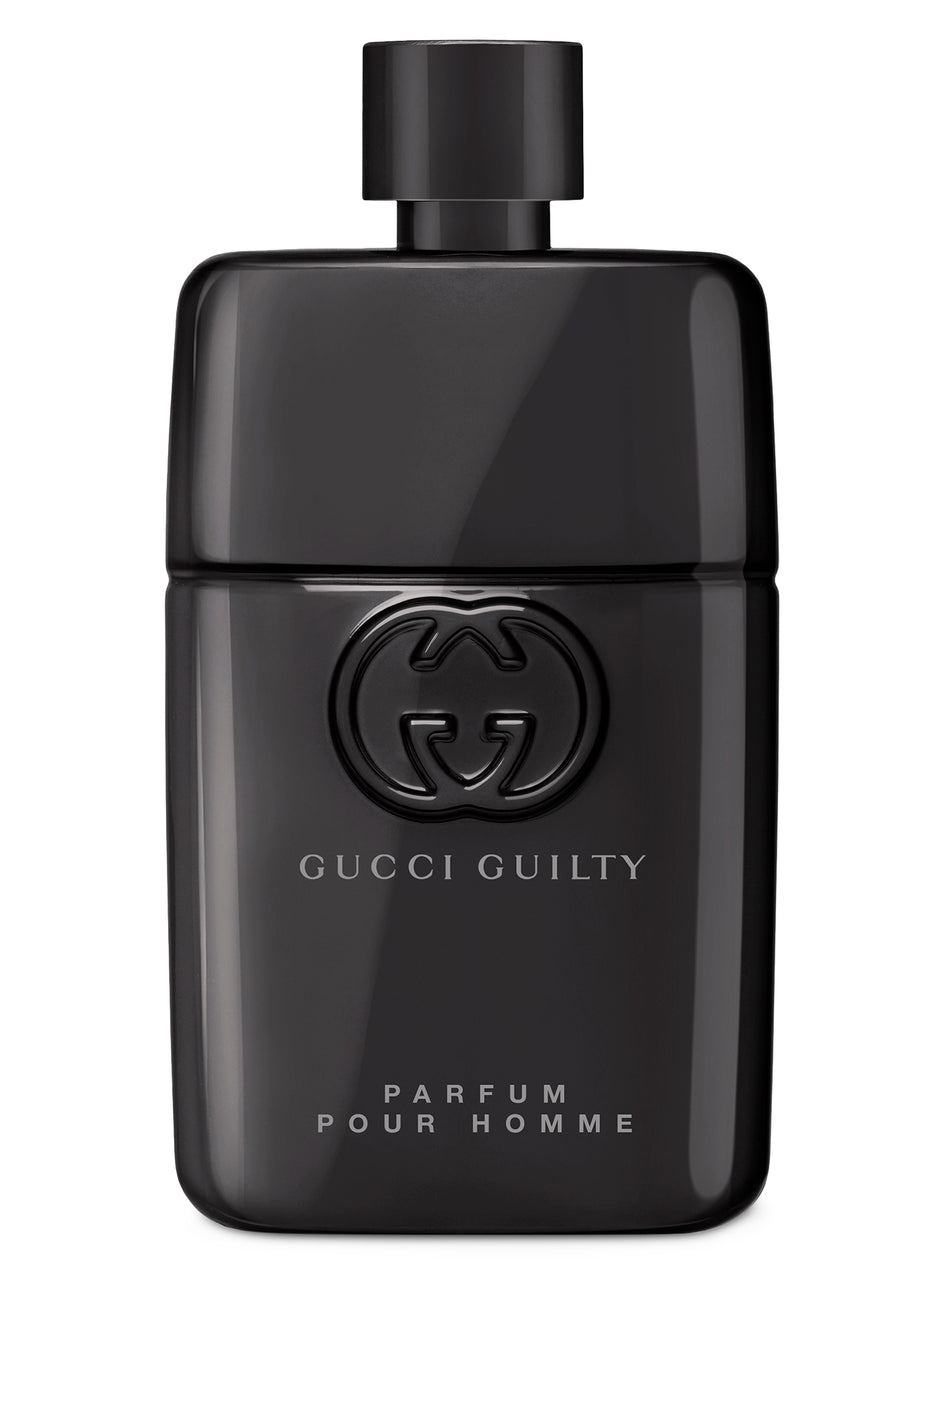 Gucci Guilty Pour Homme парфюм для мужчин